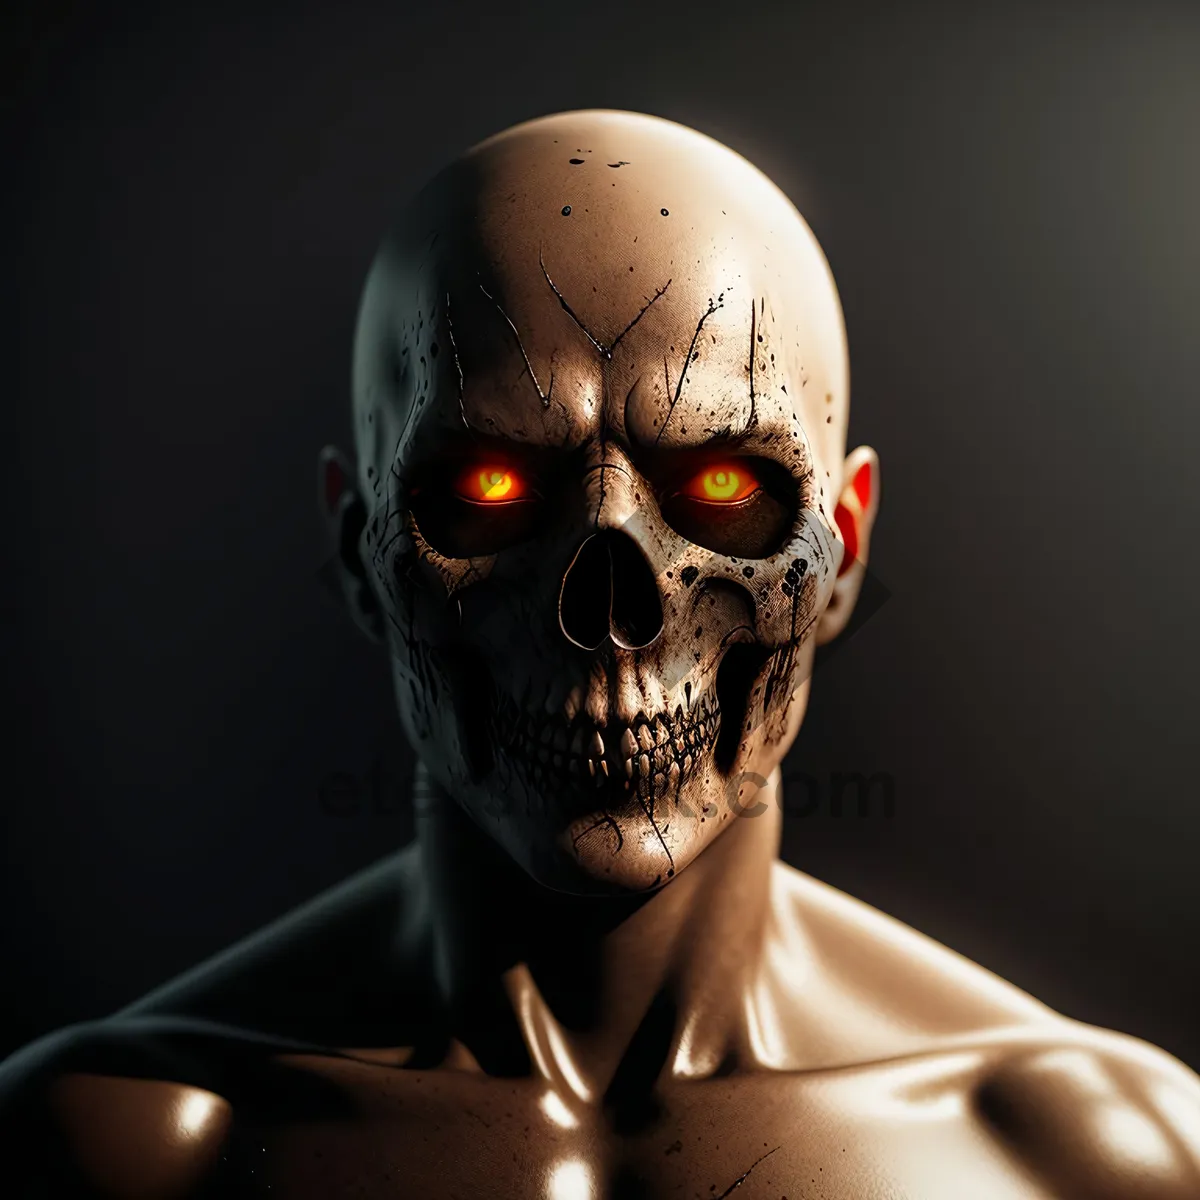 Picture of Frightening Skull with Spooky Mask: Conceptual Horror Image